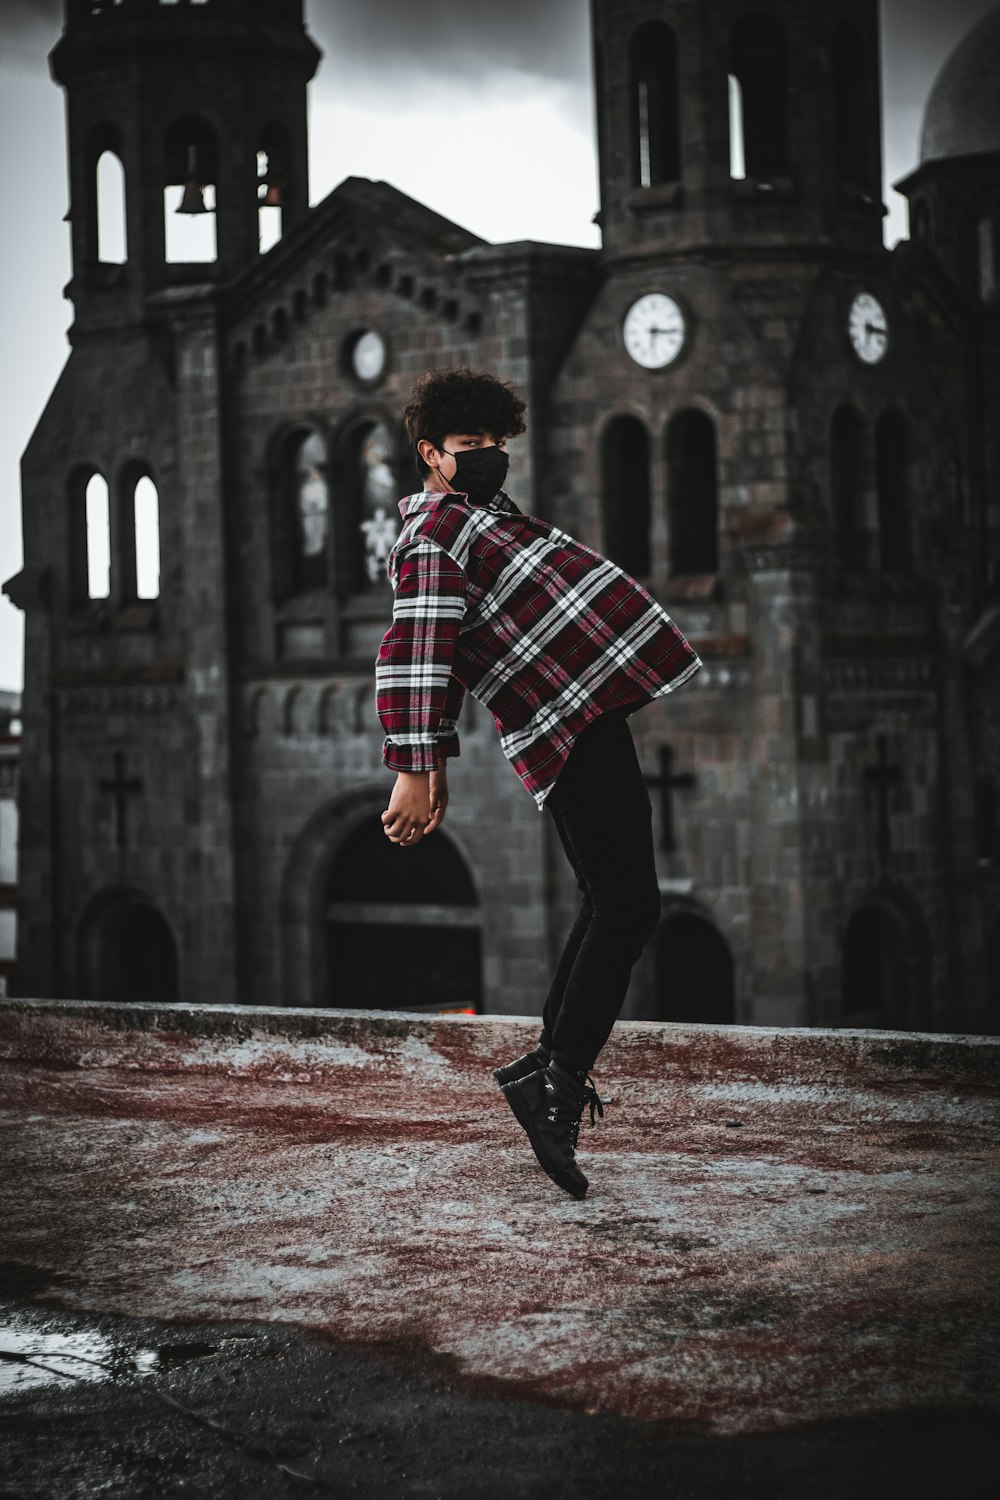 a man in a plaid shirt is dancing in front of an old building